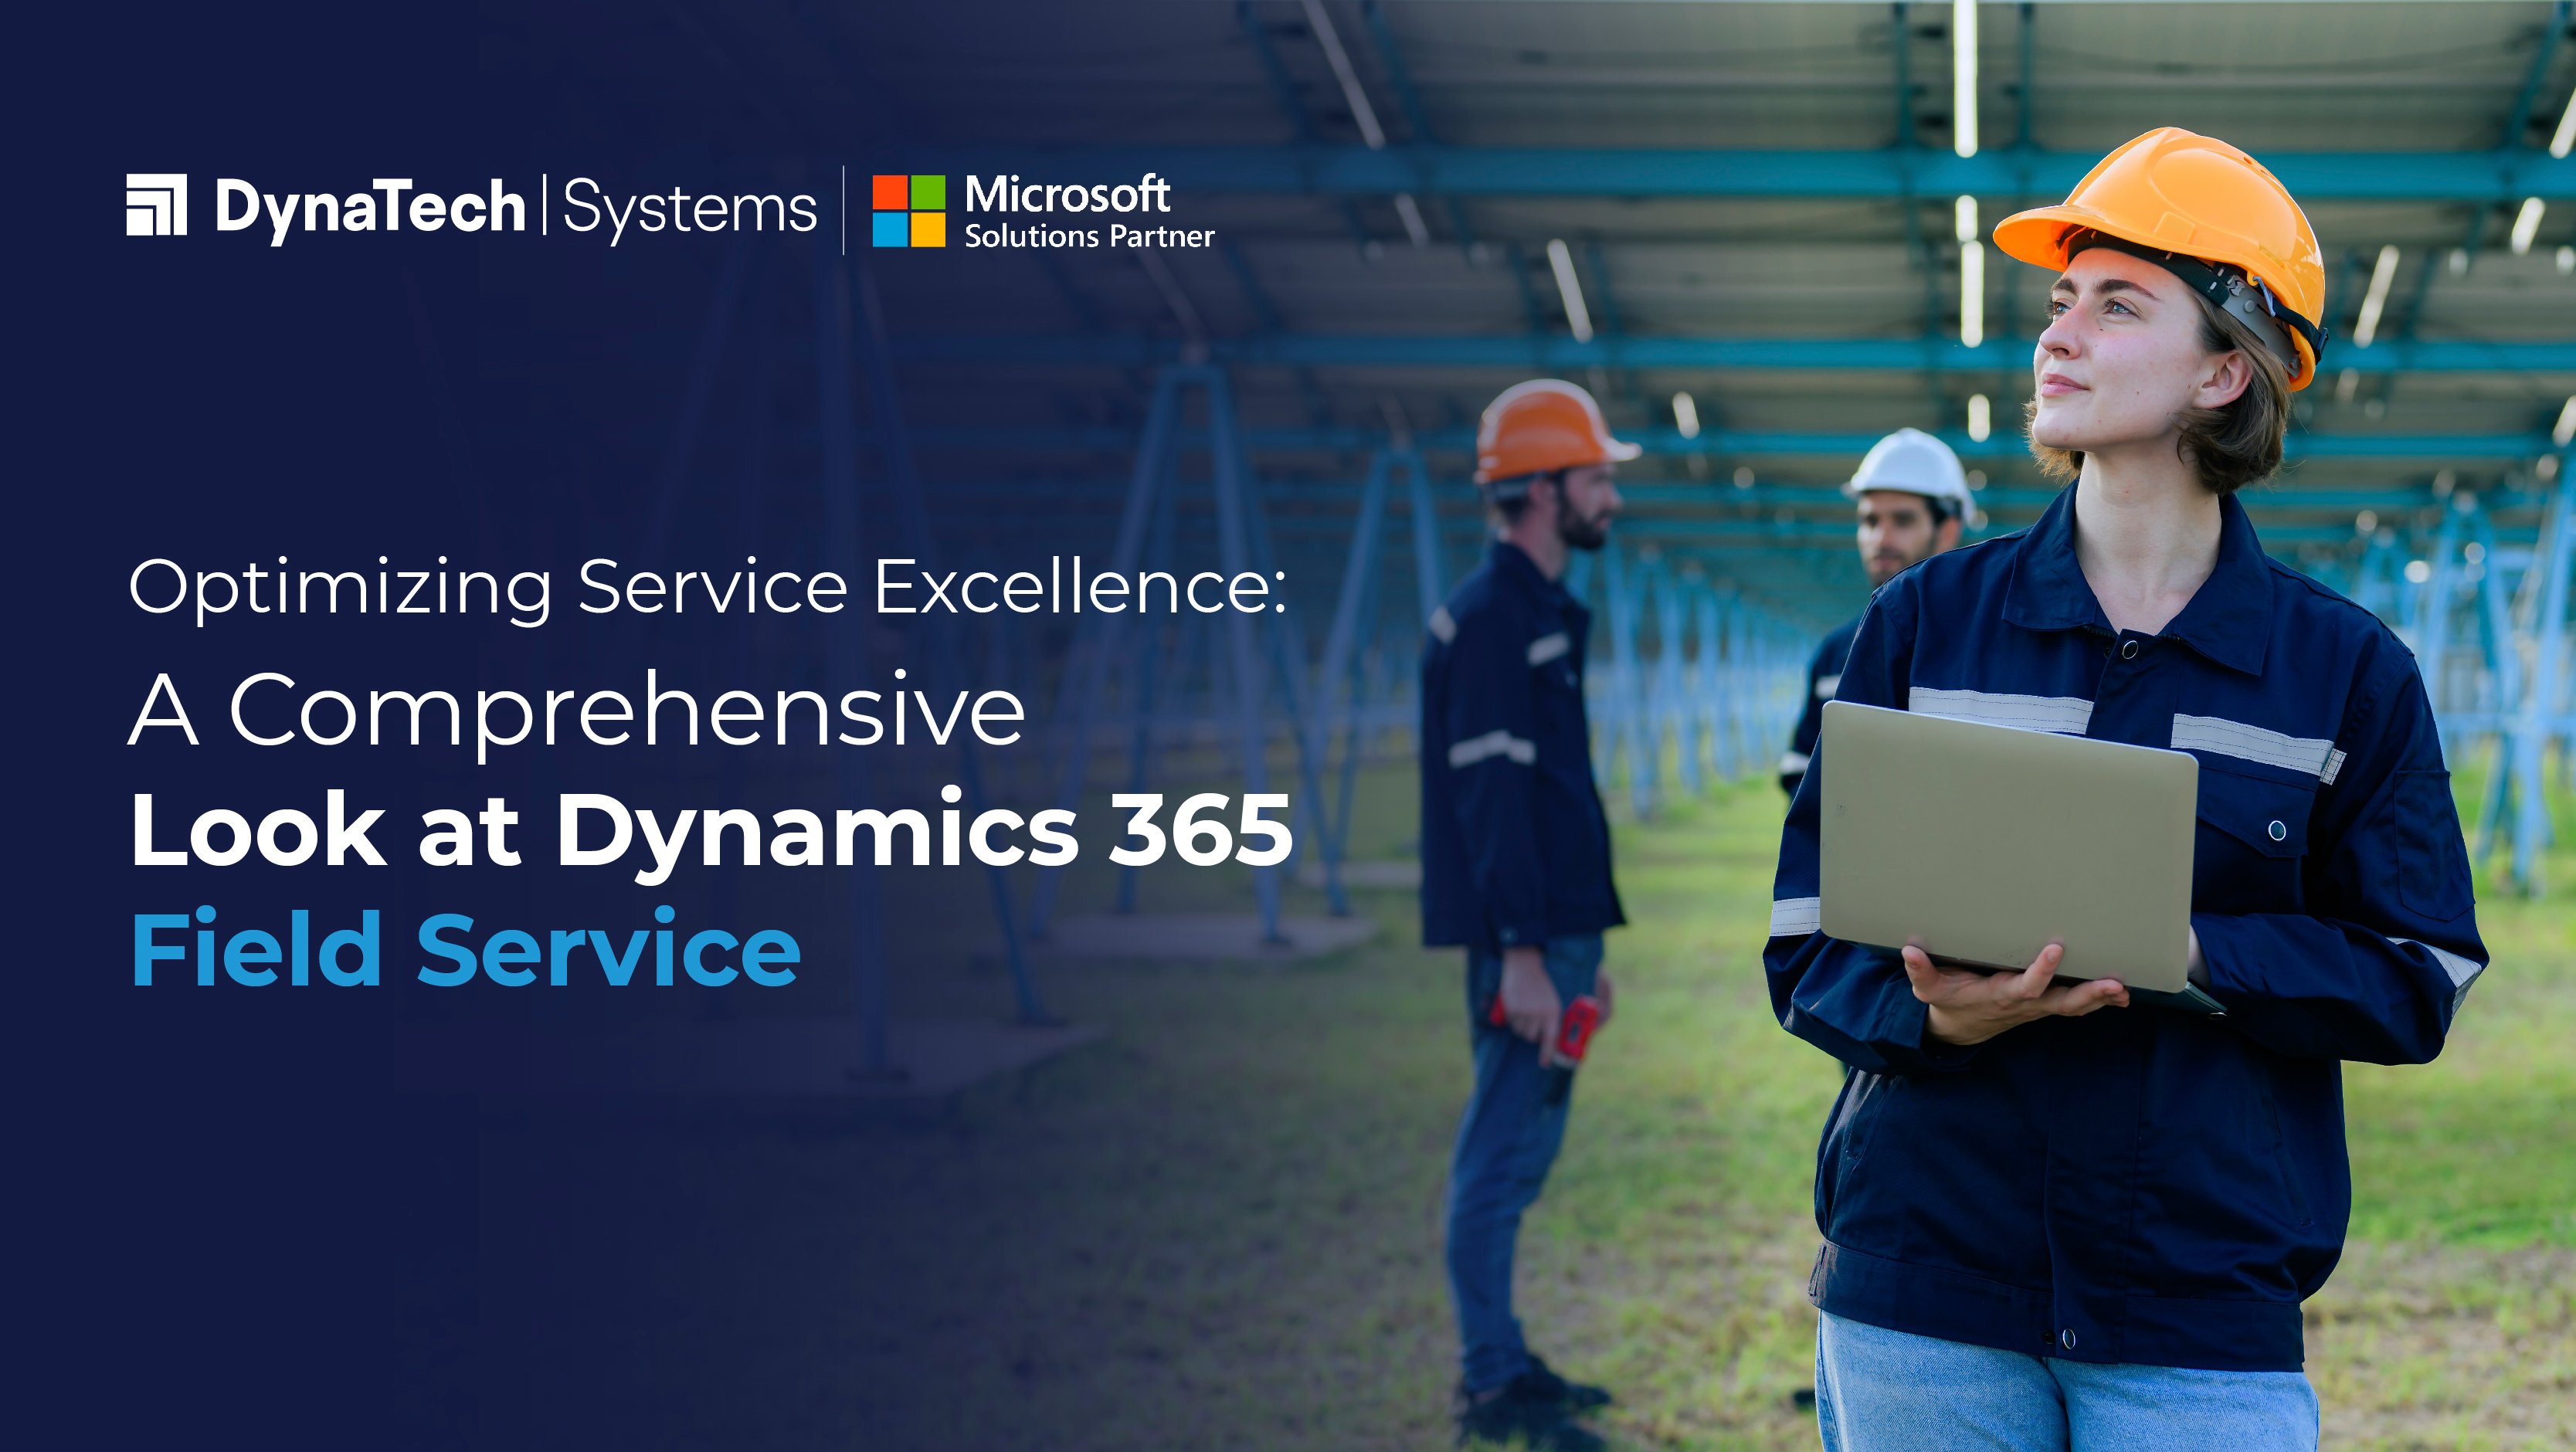 Optimizing Service Excellence: A Comprehensive Look at Dynamics 365 Field Service